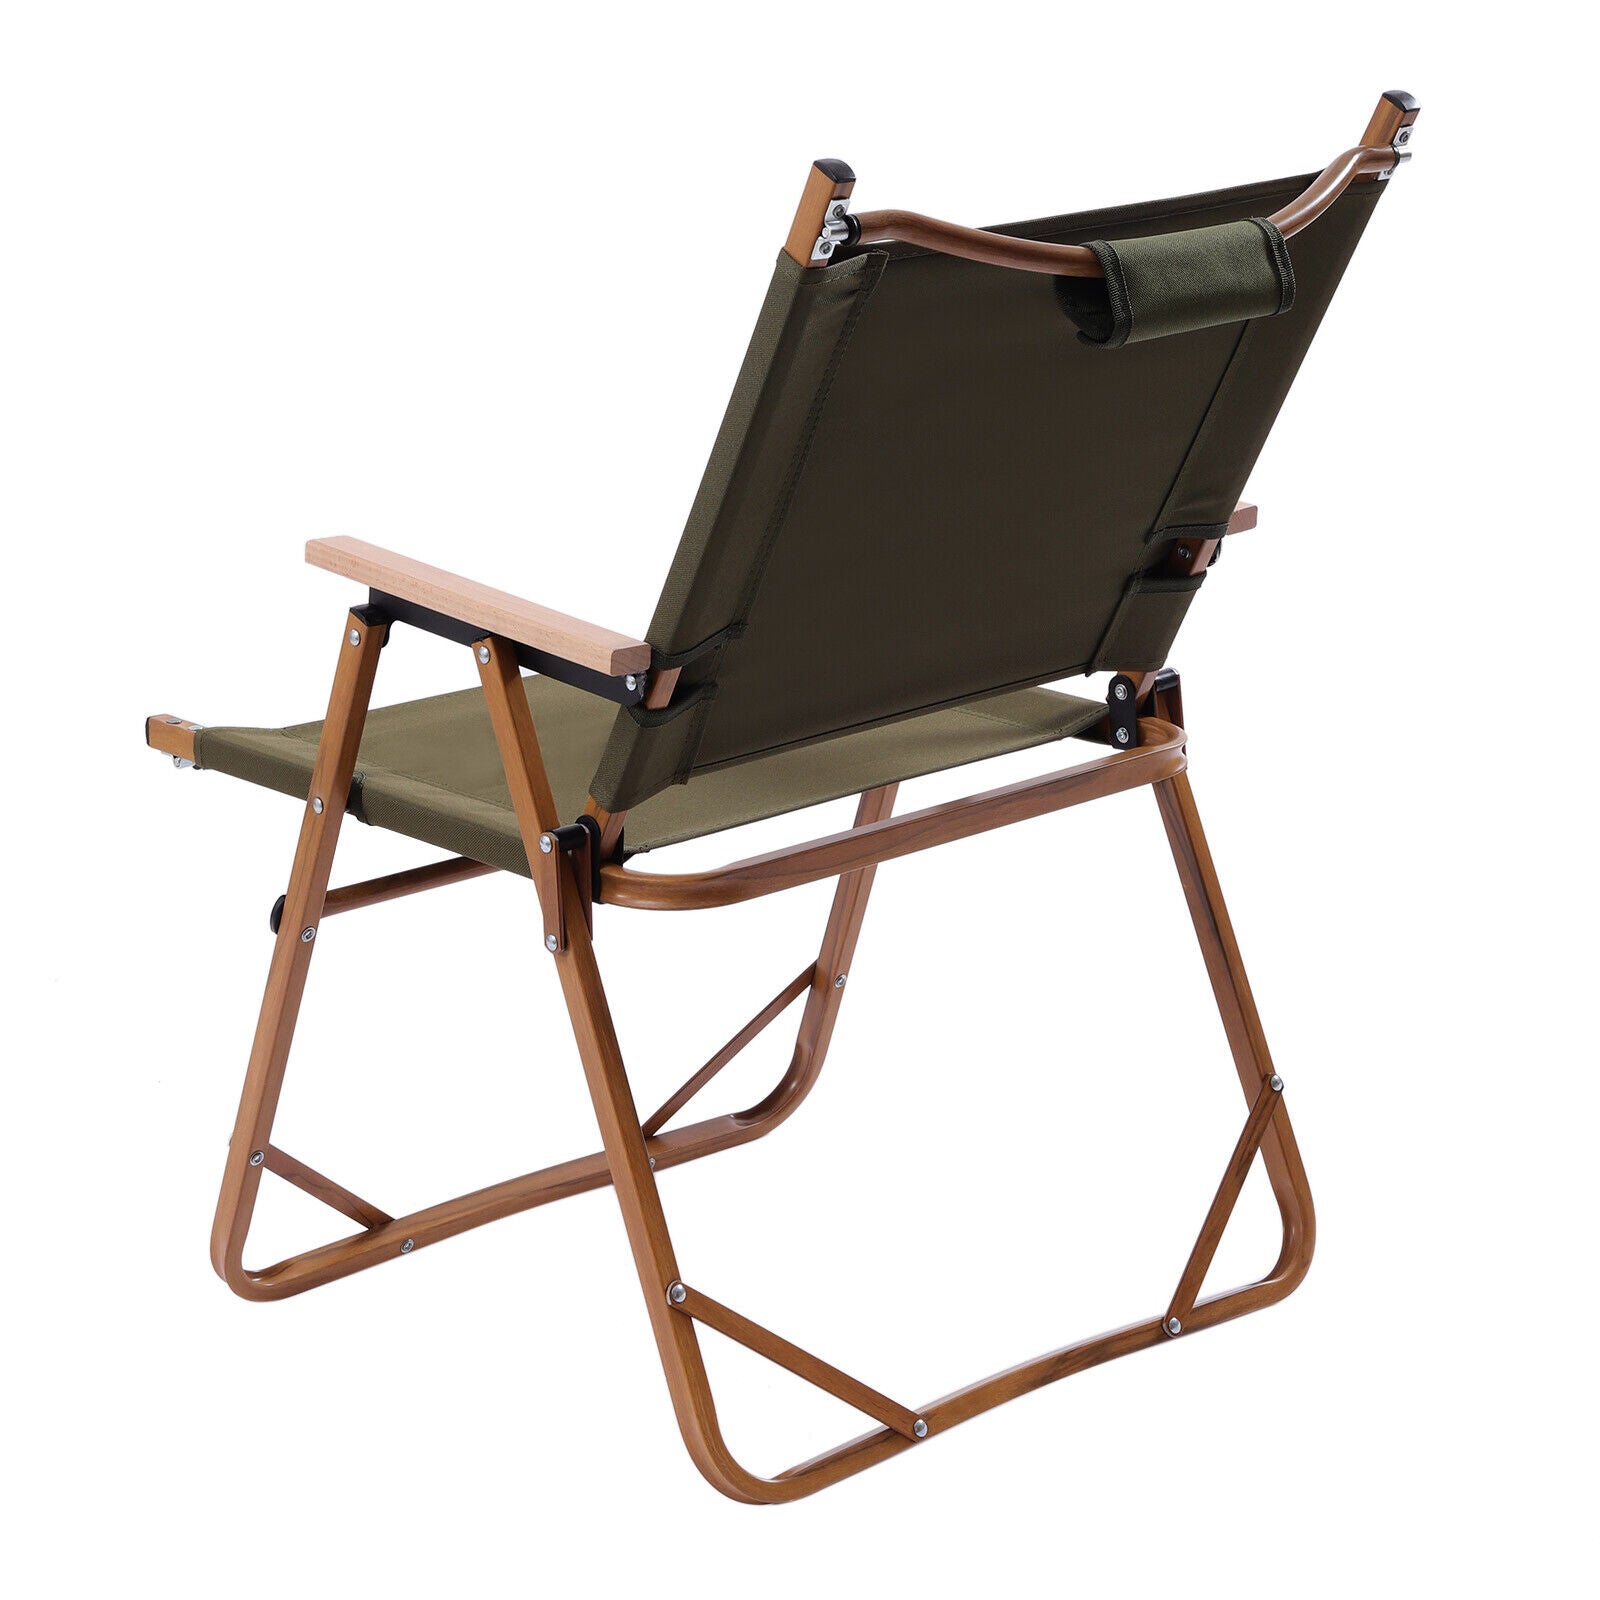 Chairs Outdoor Camping Chair Low Beach Camp Lawn Hiking Folding Fishing Chair